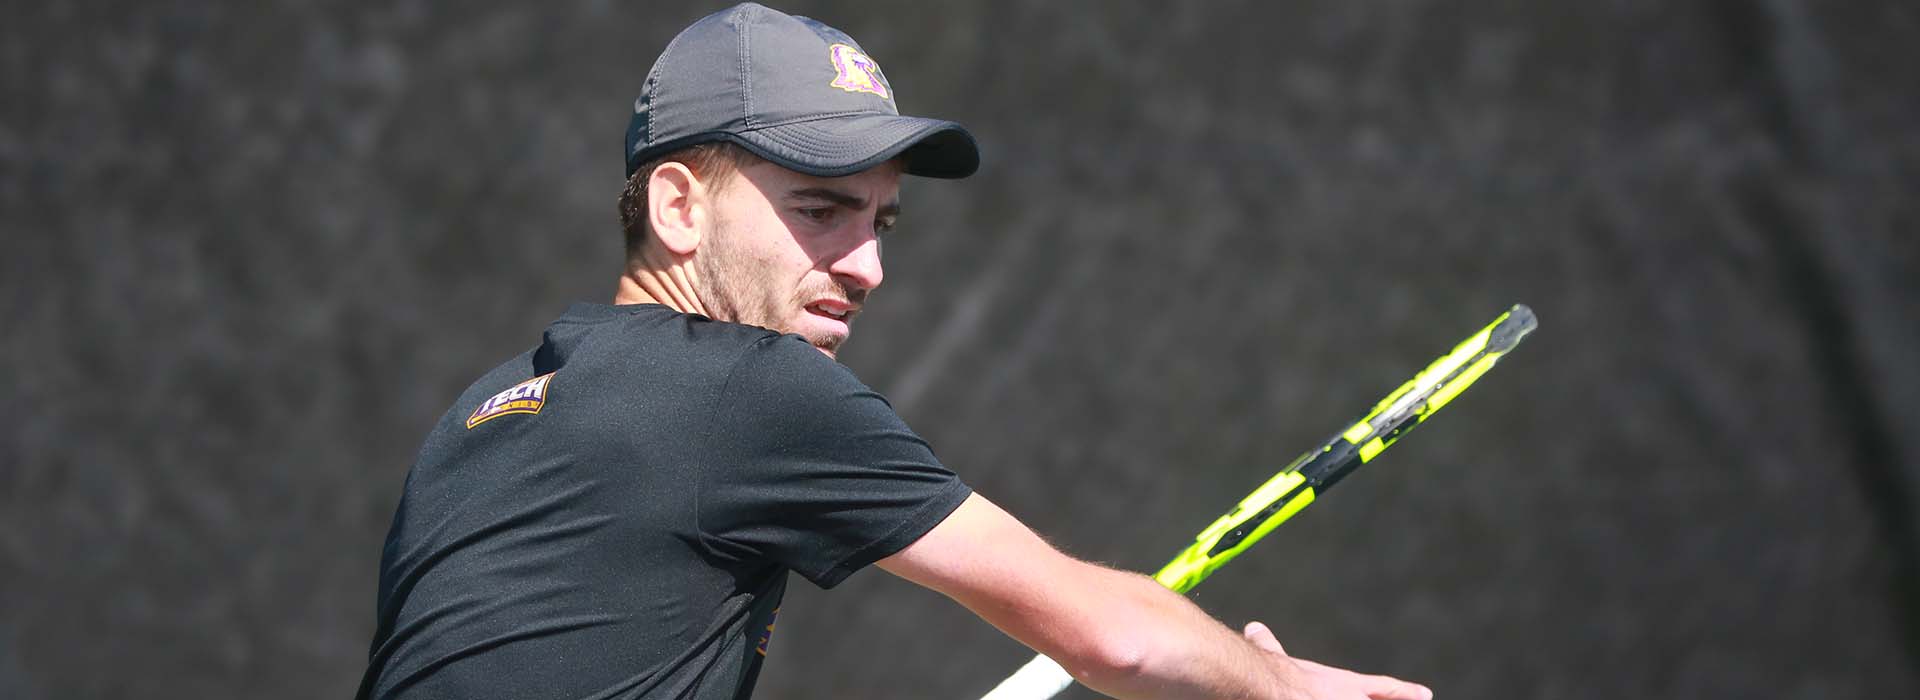 Golden Eagle tennis marches to Chattanooga for UTC Steve Baras Fall Classic